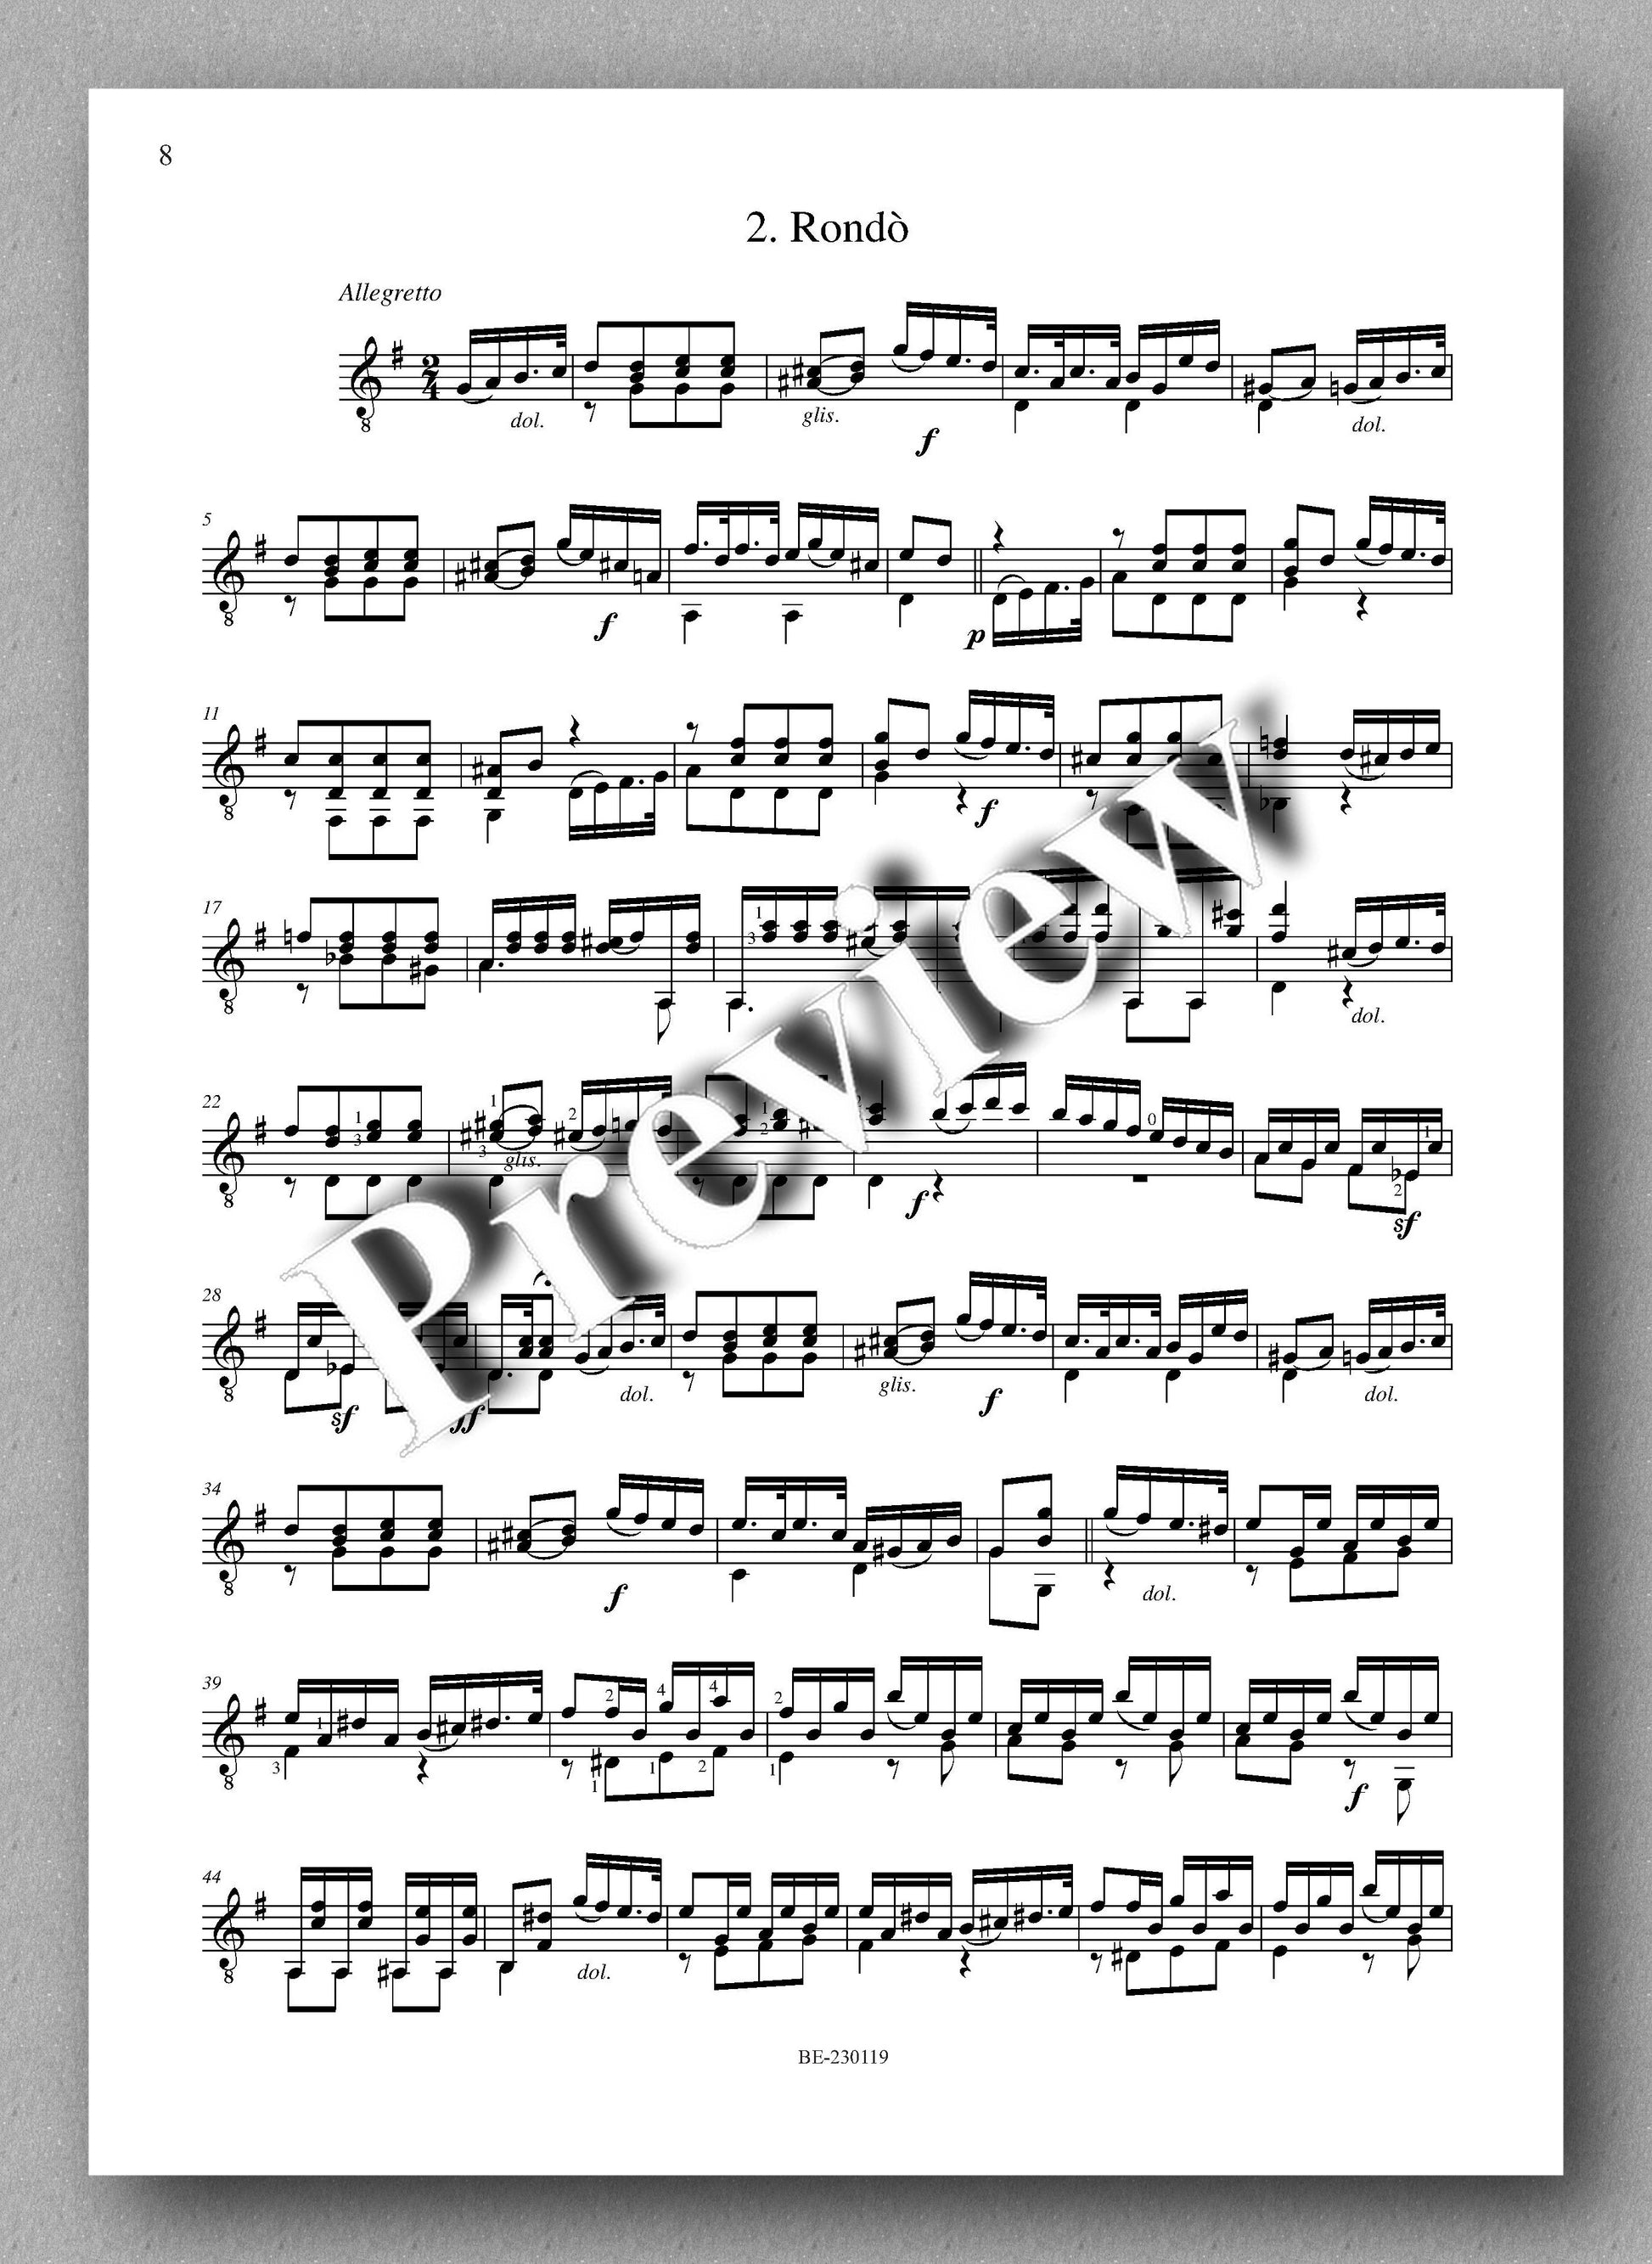 Molino, Collected Works for Guitar Solo, Vol. 31 - preview of the music score 2